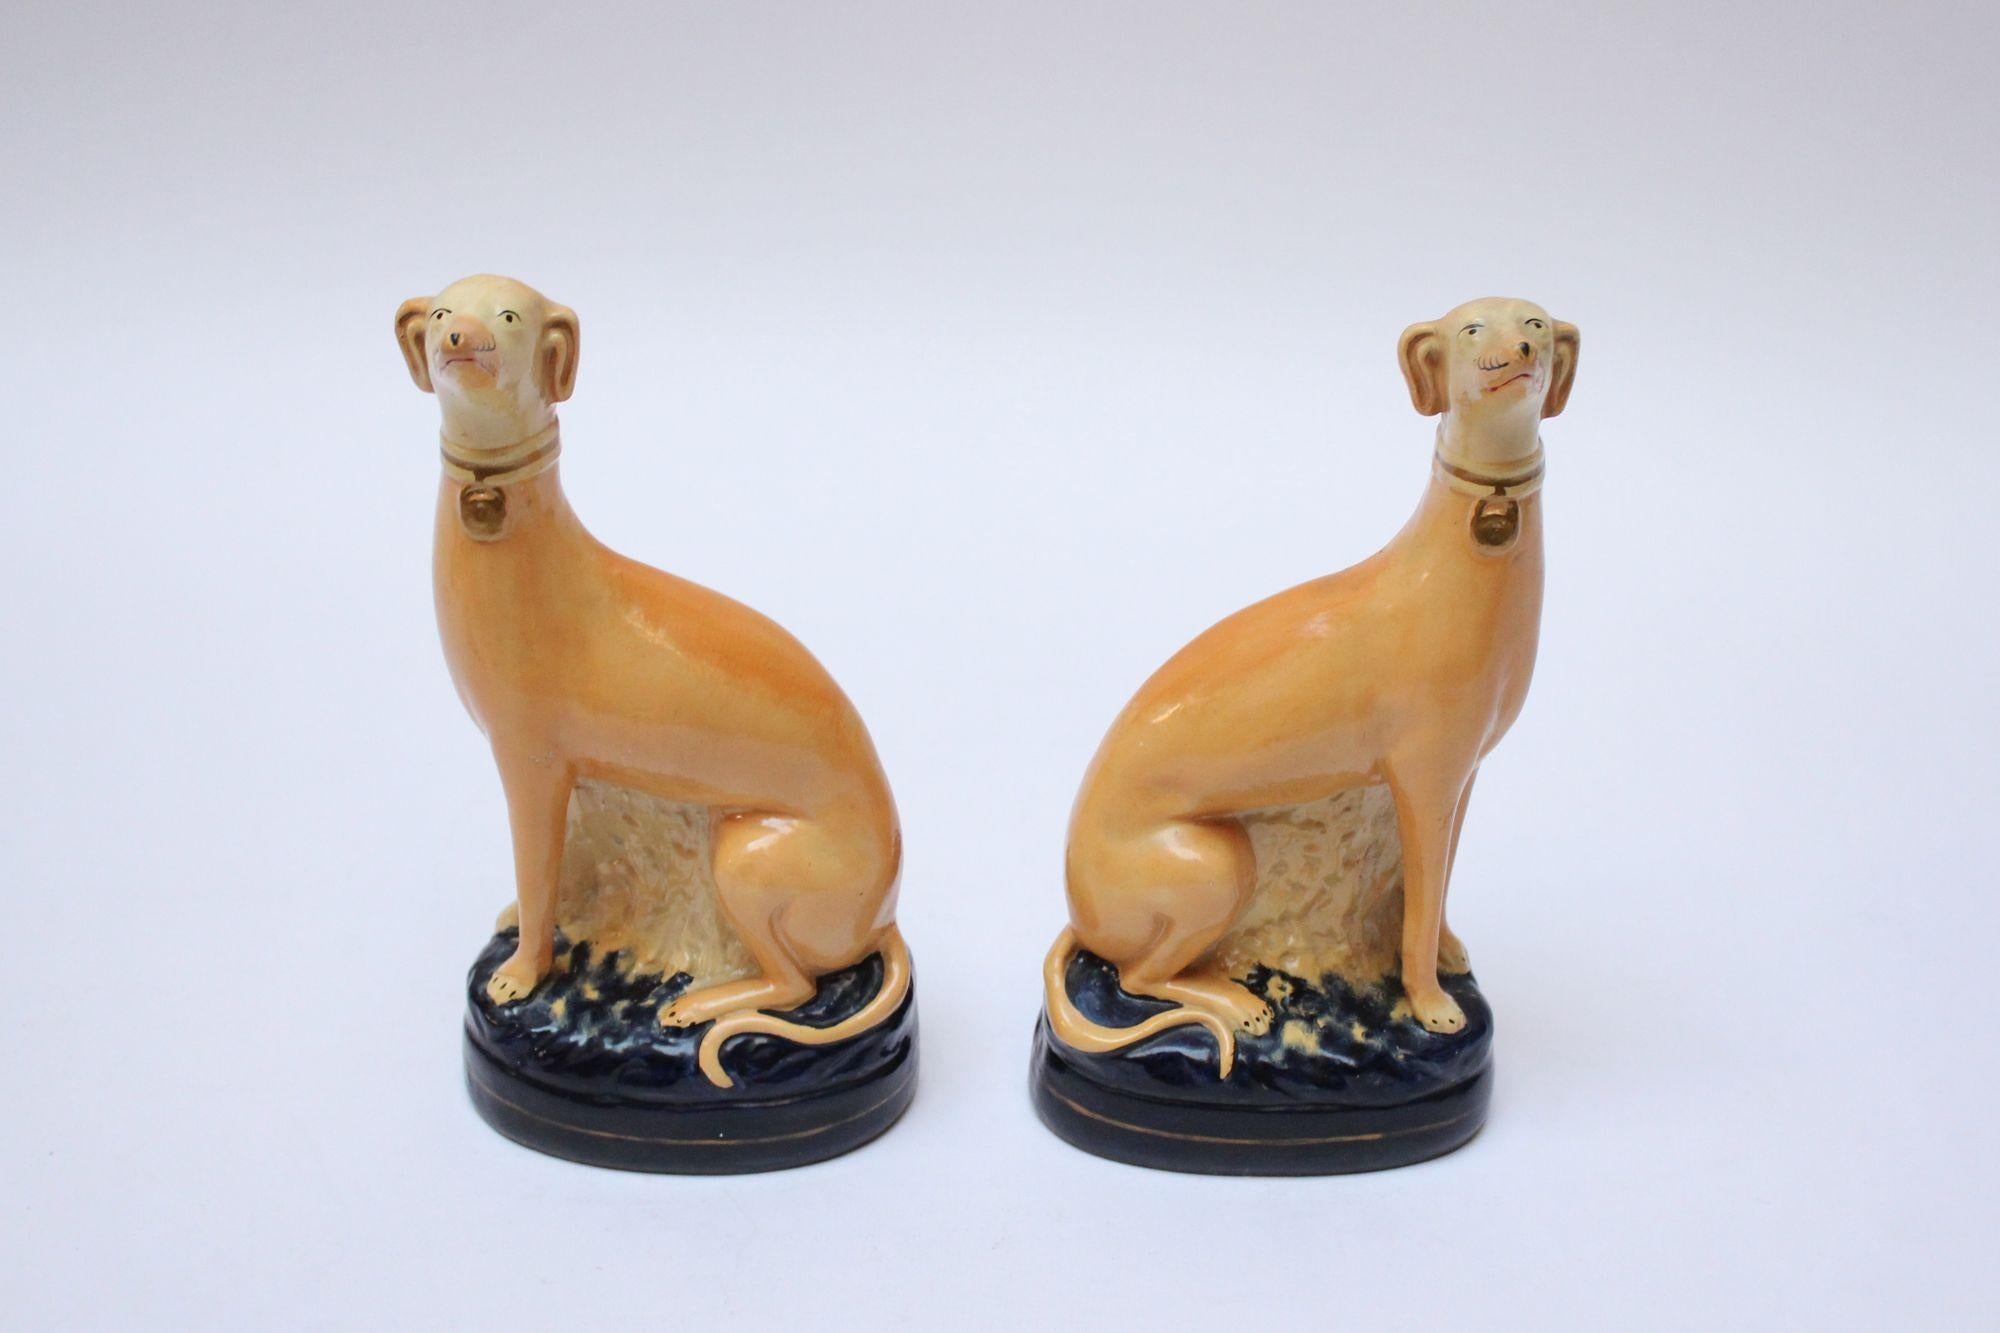 Pair of Staffordshire-style porcelain Italian greyhound/whippet bookends by Borghese (Italy, ca. late 1920s/early 1930s). Composed of statuesque, tan greyhounds with black hand-painted facial/paw details and gold collars perched on navy-blue poufs.